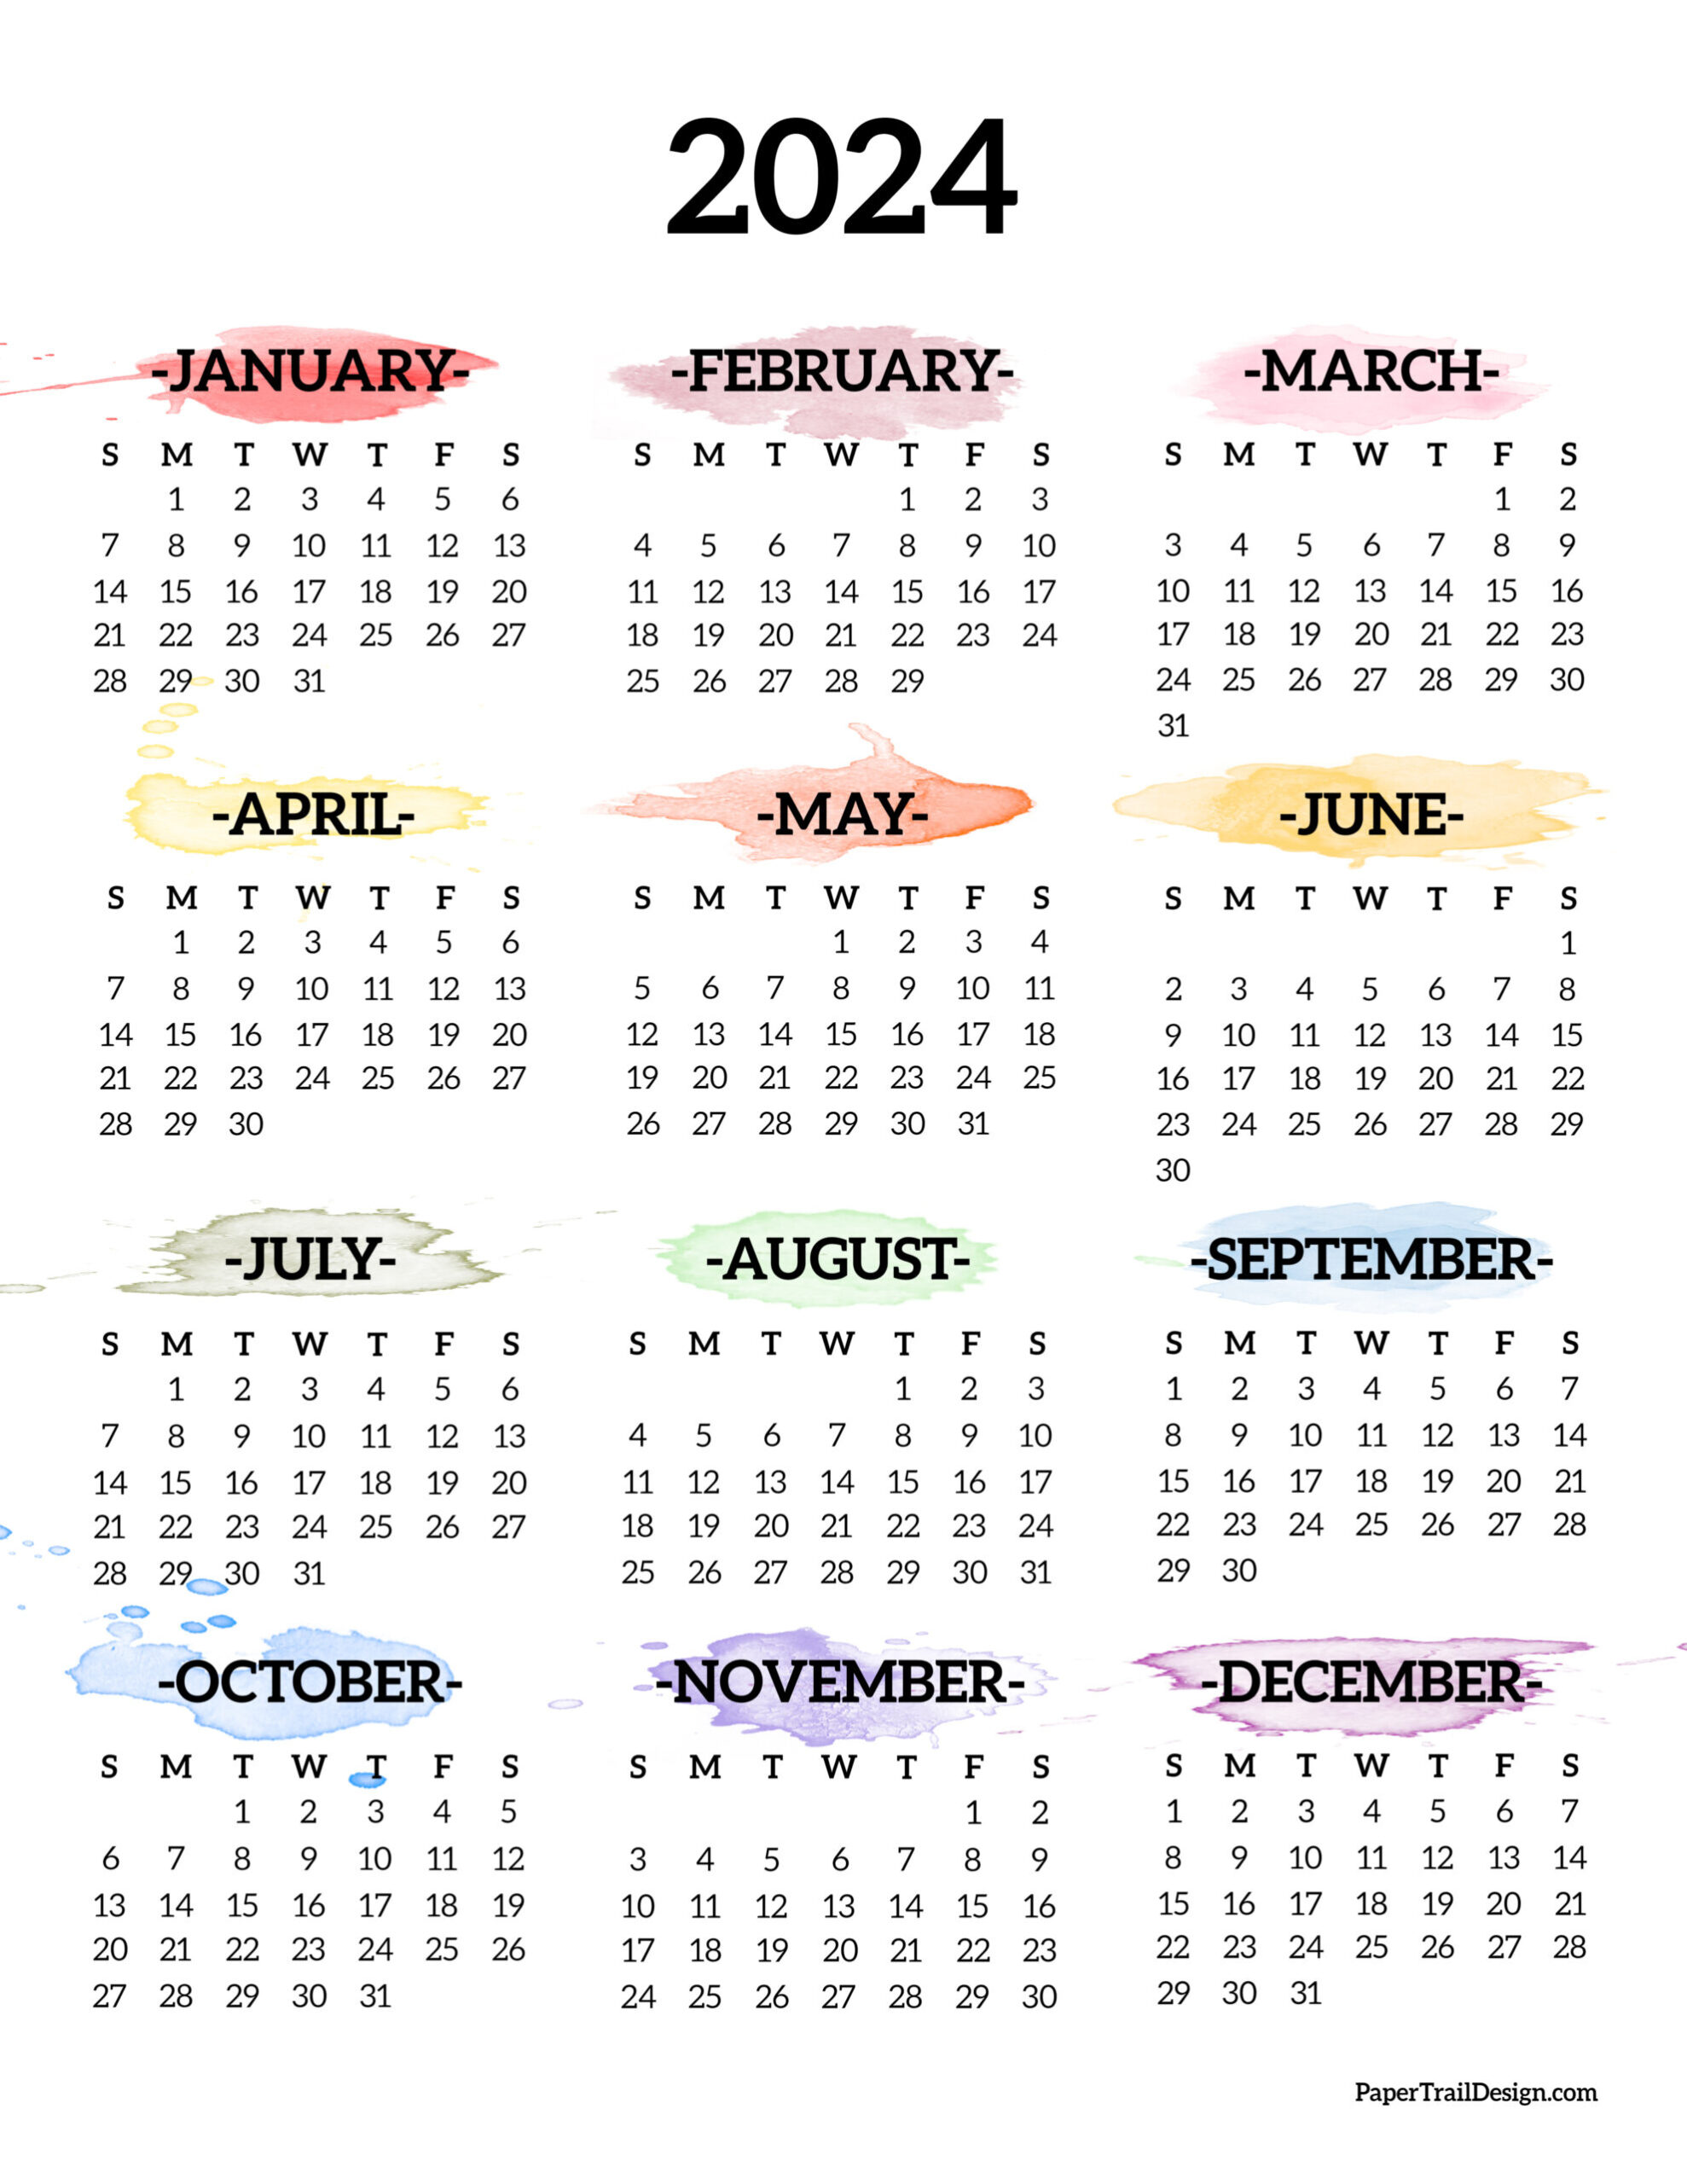 Calendar 2024 Printable One Page - Paper Trail Design | 2024 Calendar Year At A Glance Printable